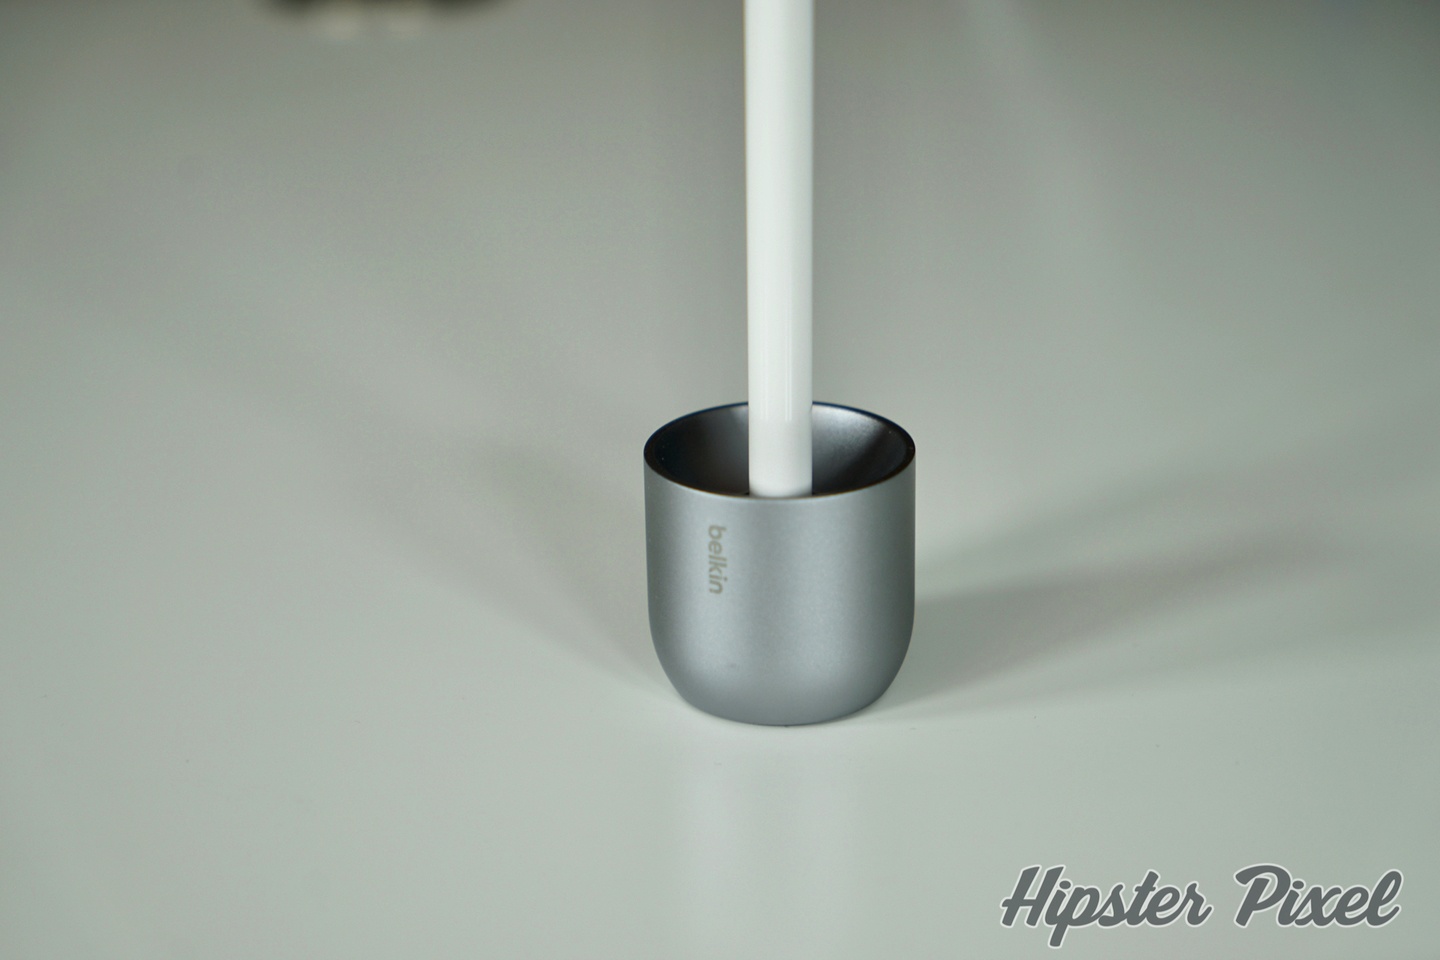 Belkin Stand for Apple Pencil Review